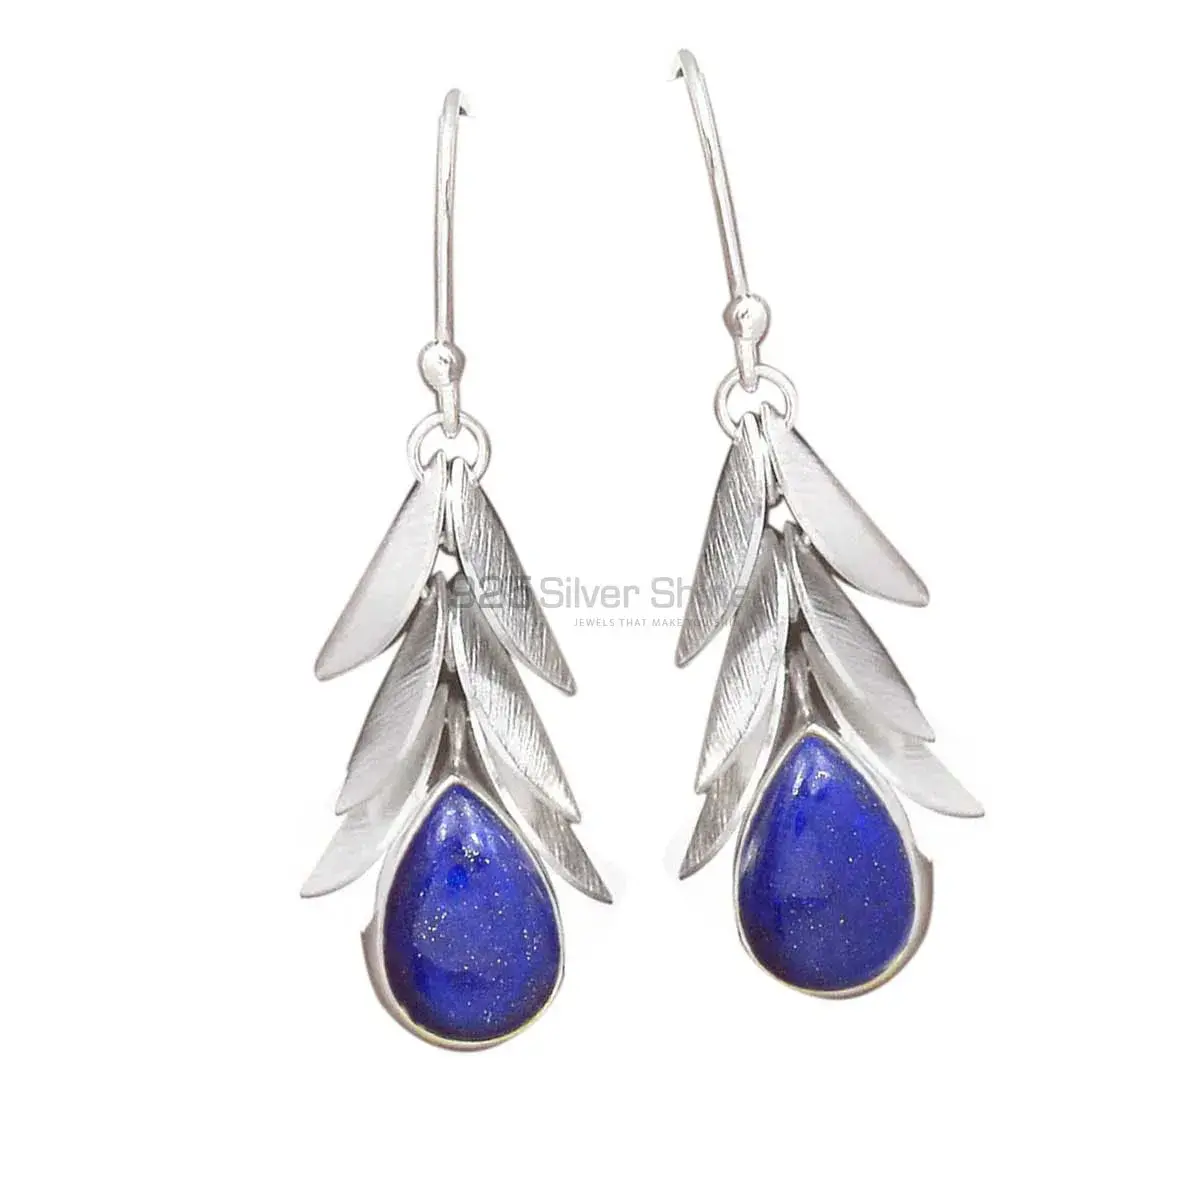 Natural Lapis Gemstone Earrings Exporters In 925 Sterling Silver Jewelry 925SE3003